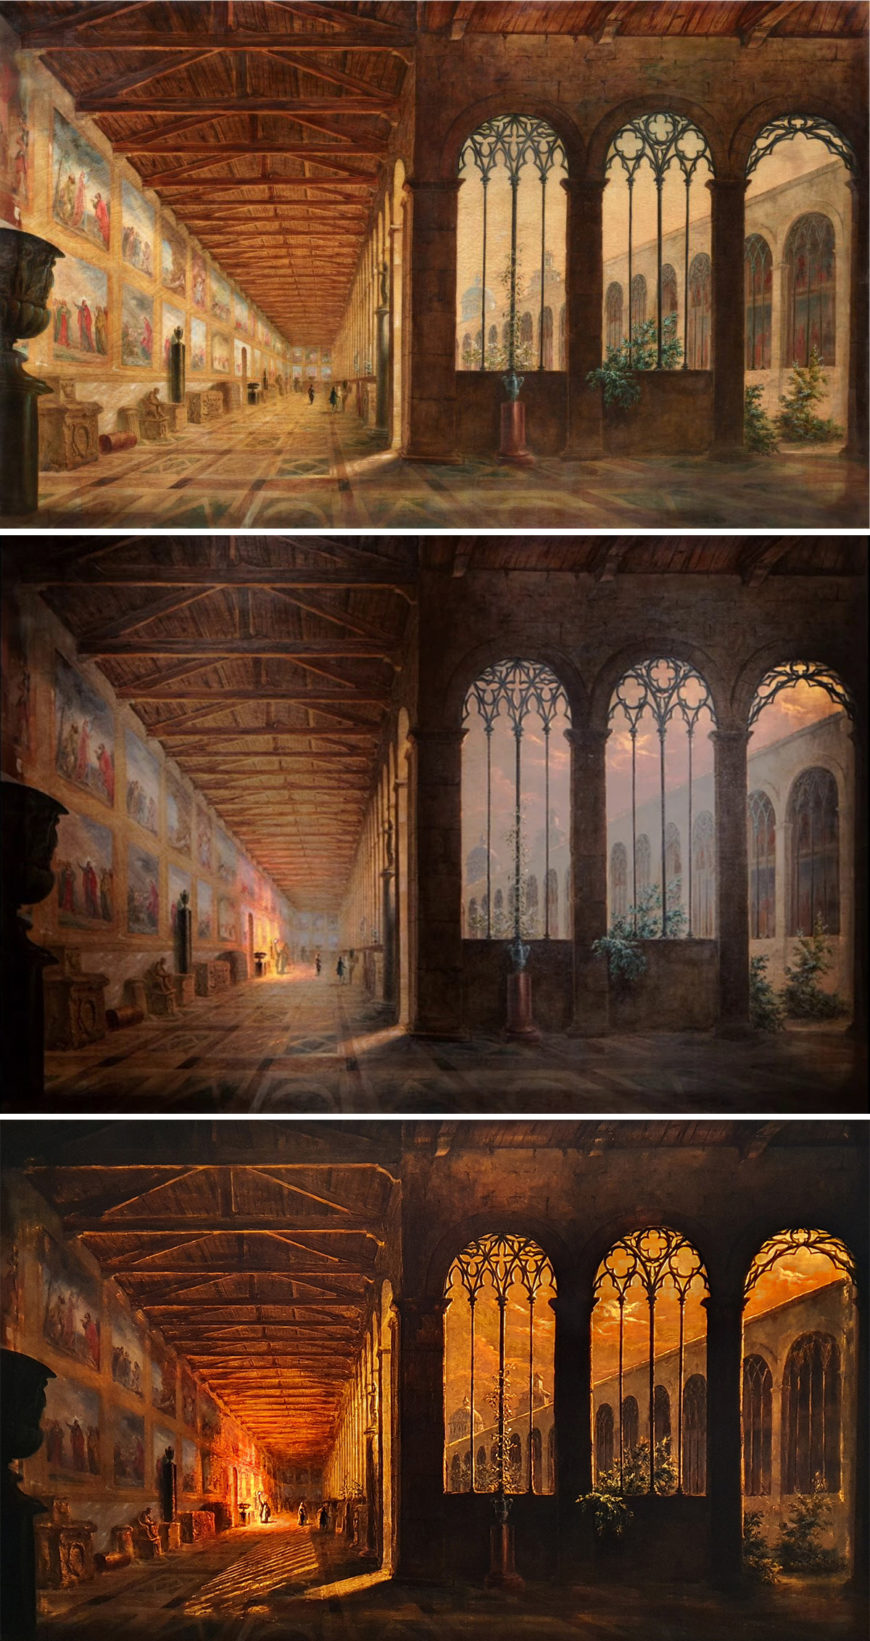 A diorama by Daguerre shown with different projections of light. Louis Daguerre and Charles Bouton, The Campo Santo of Pisa, c. 1834, oil on canvas, 92 x 152 cm (Galerie Perrin, Paris)